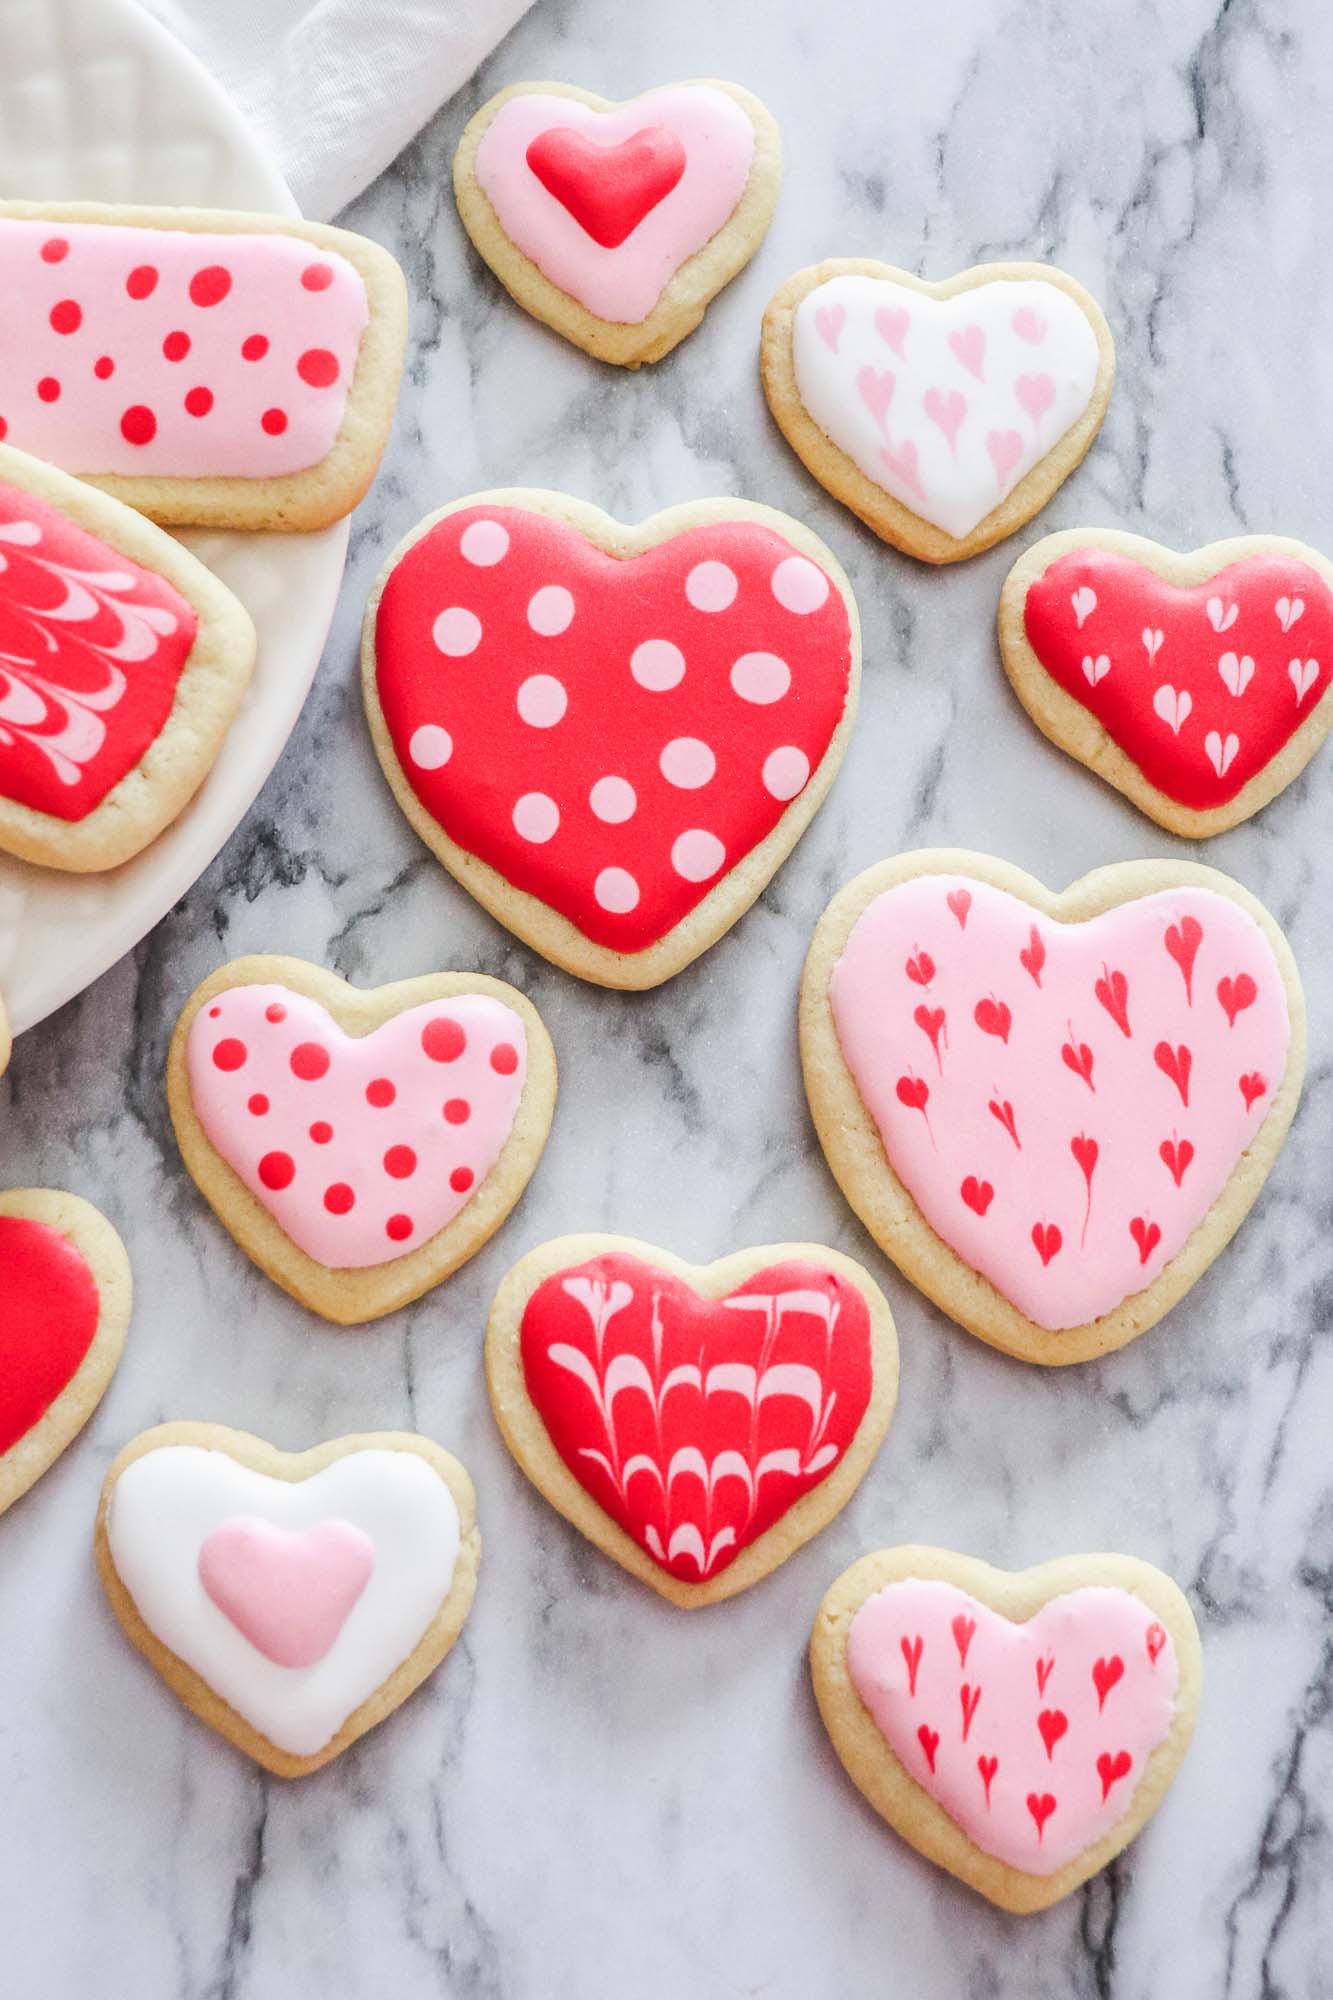 a variety of heart shaped cookies decorated with royal icing, sitting on a marble countertop